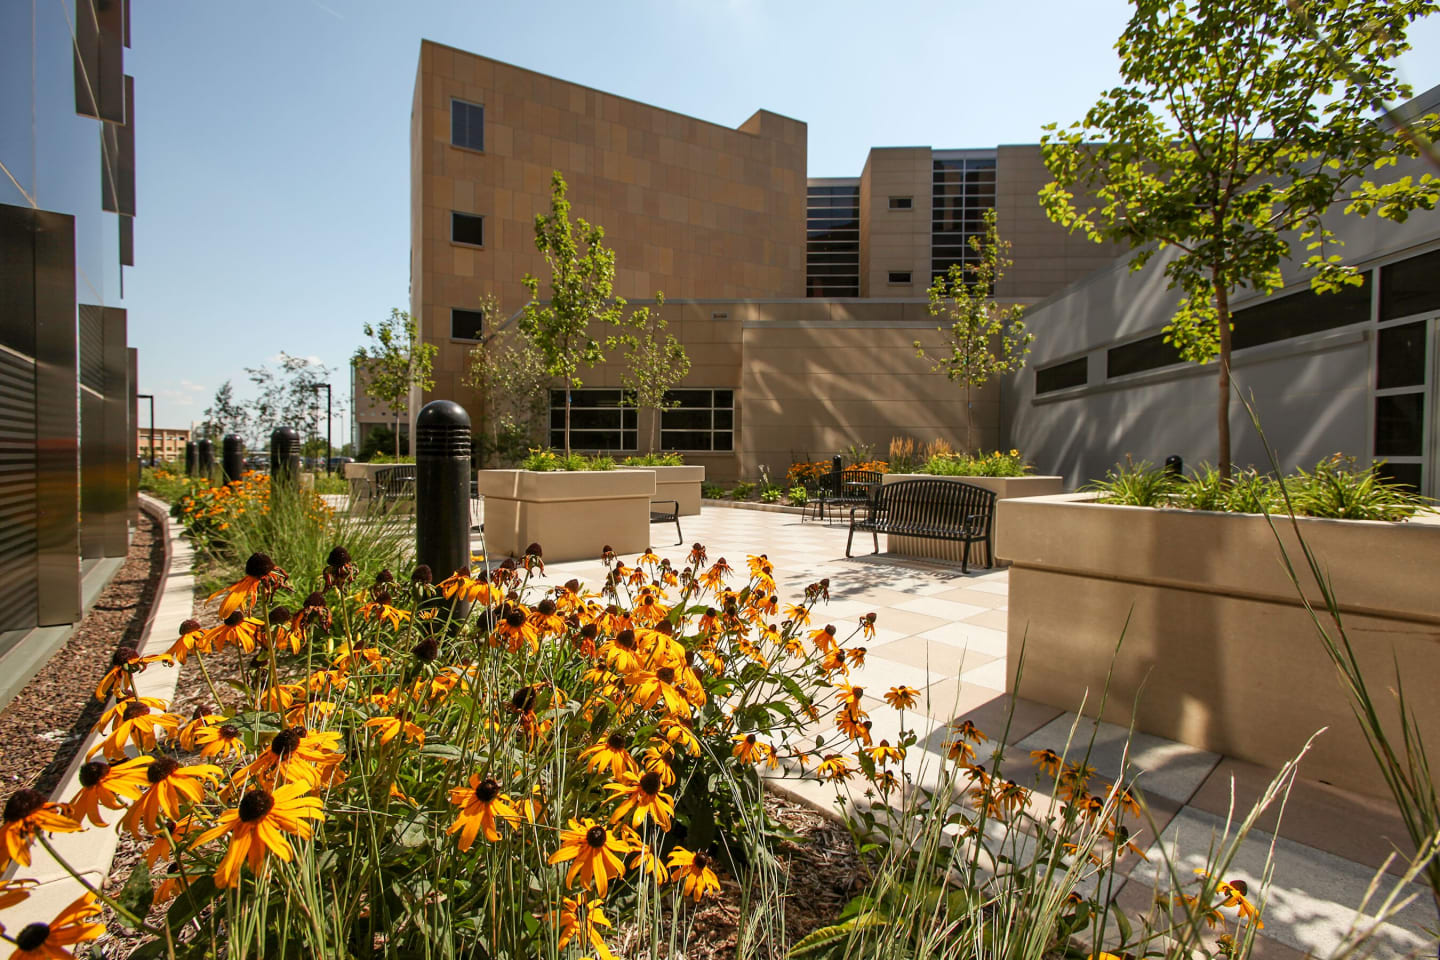 A garden courtyard surrounded by buildings